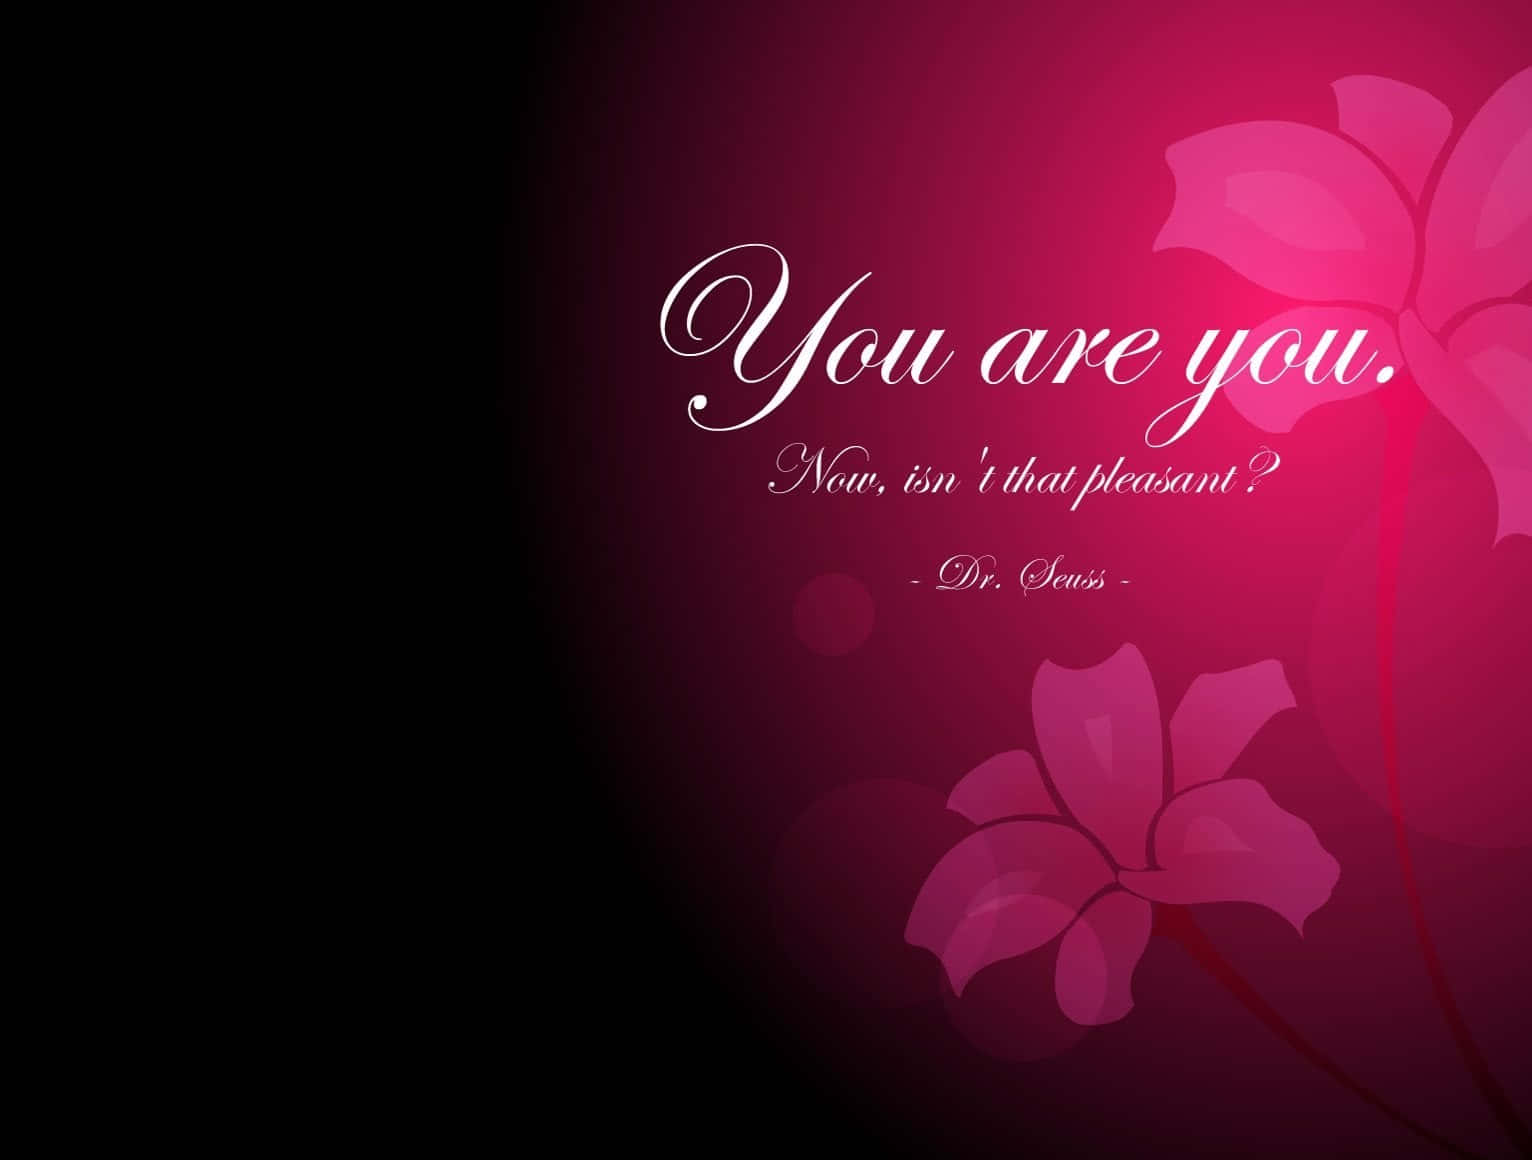 You Are You - Inspirational Quote Wallpaper